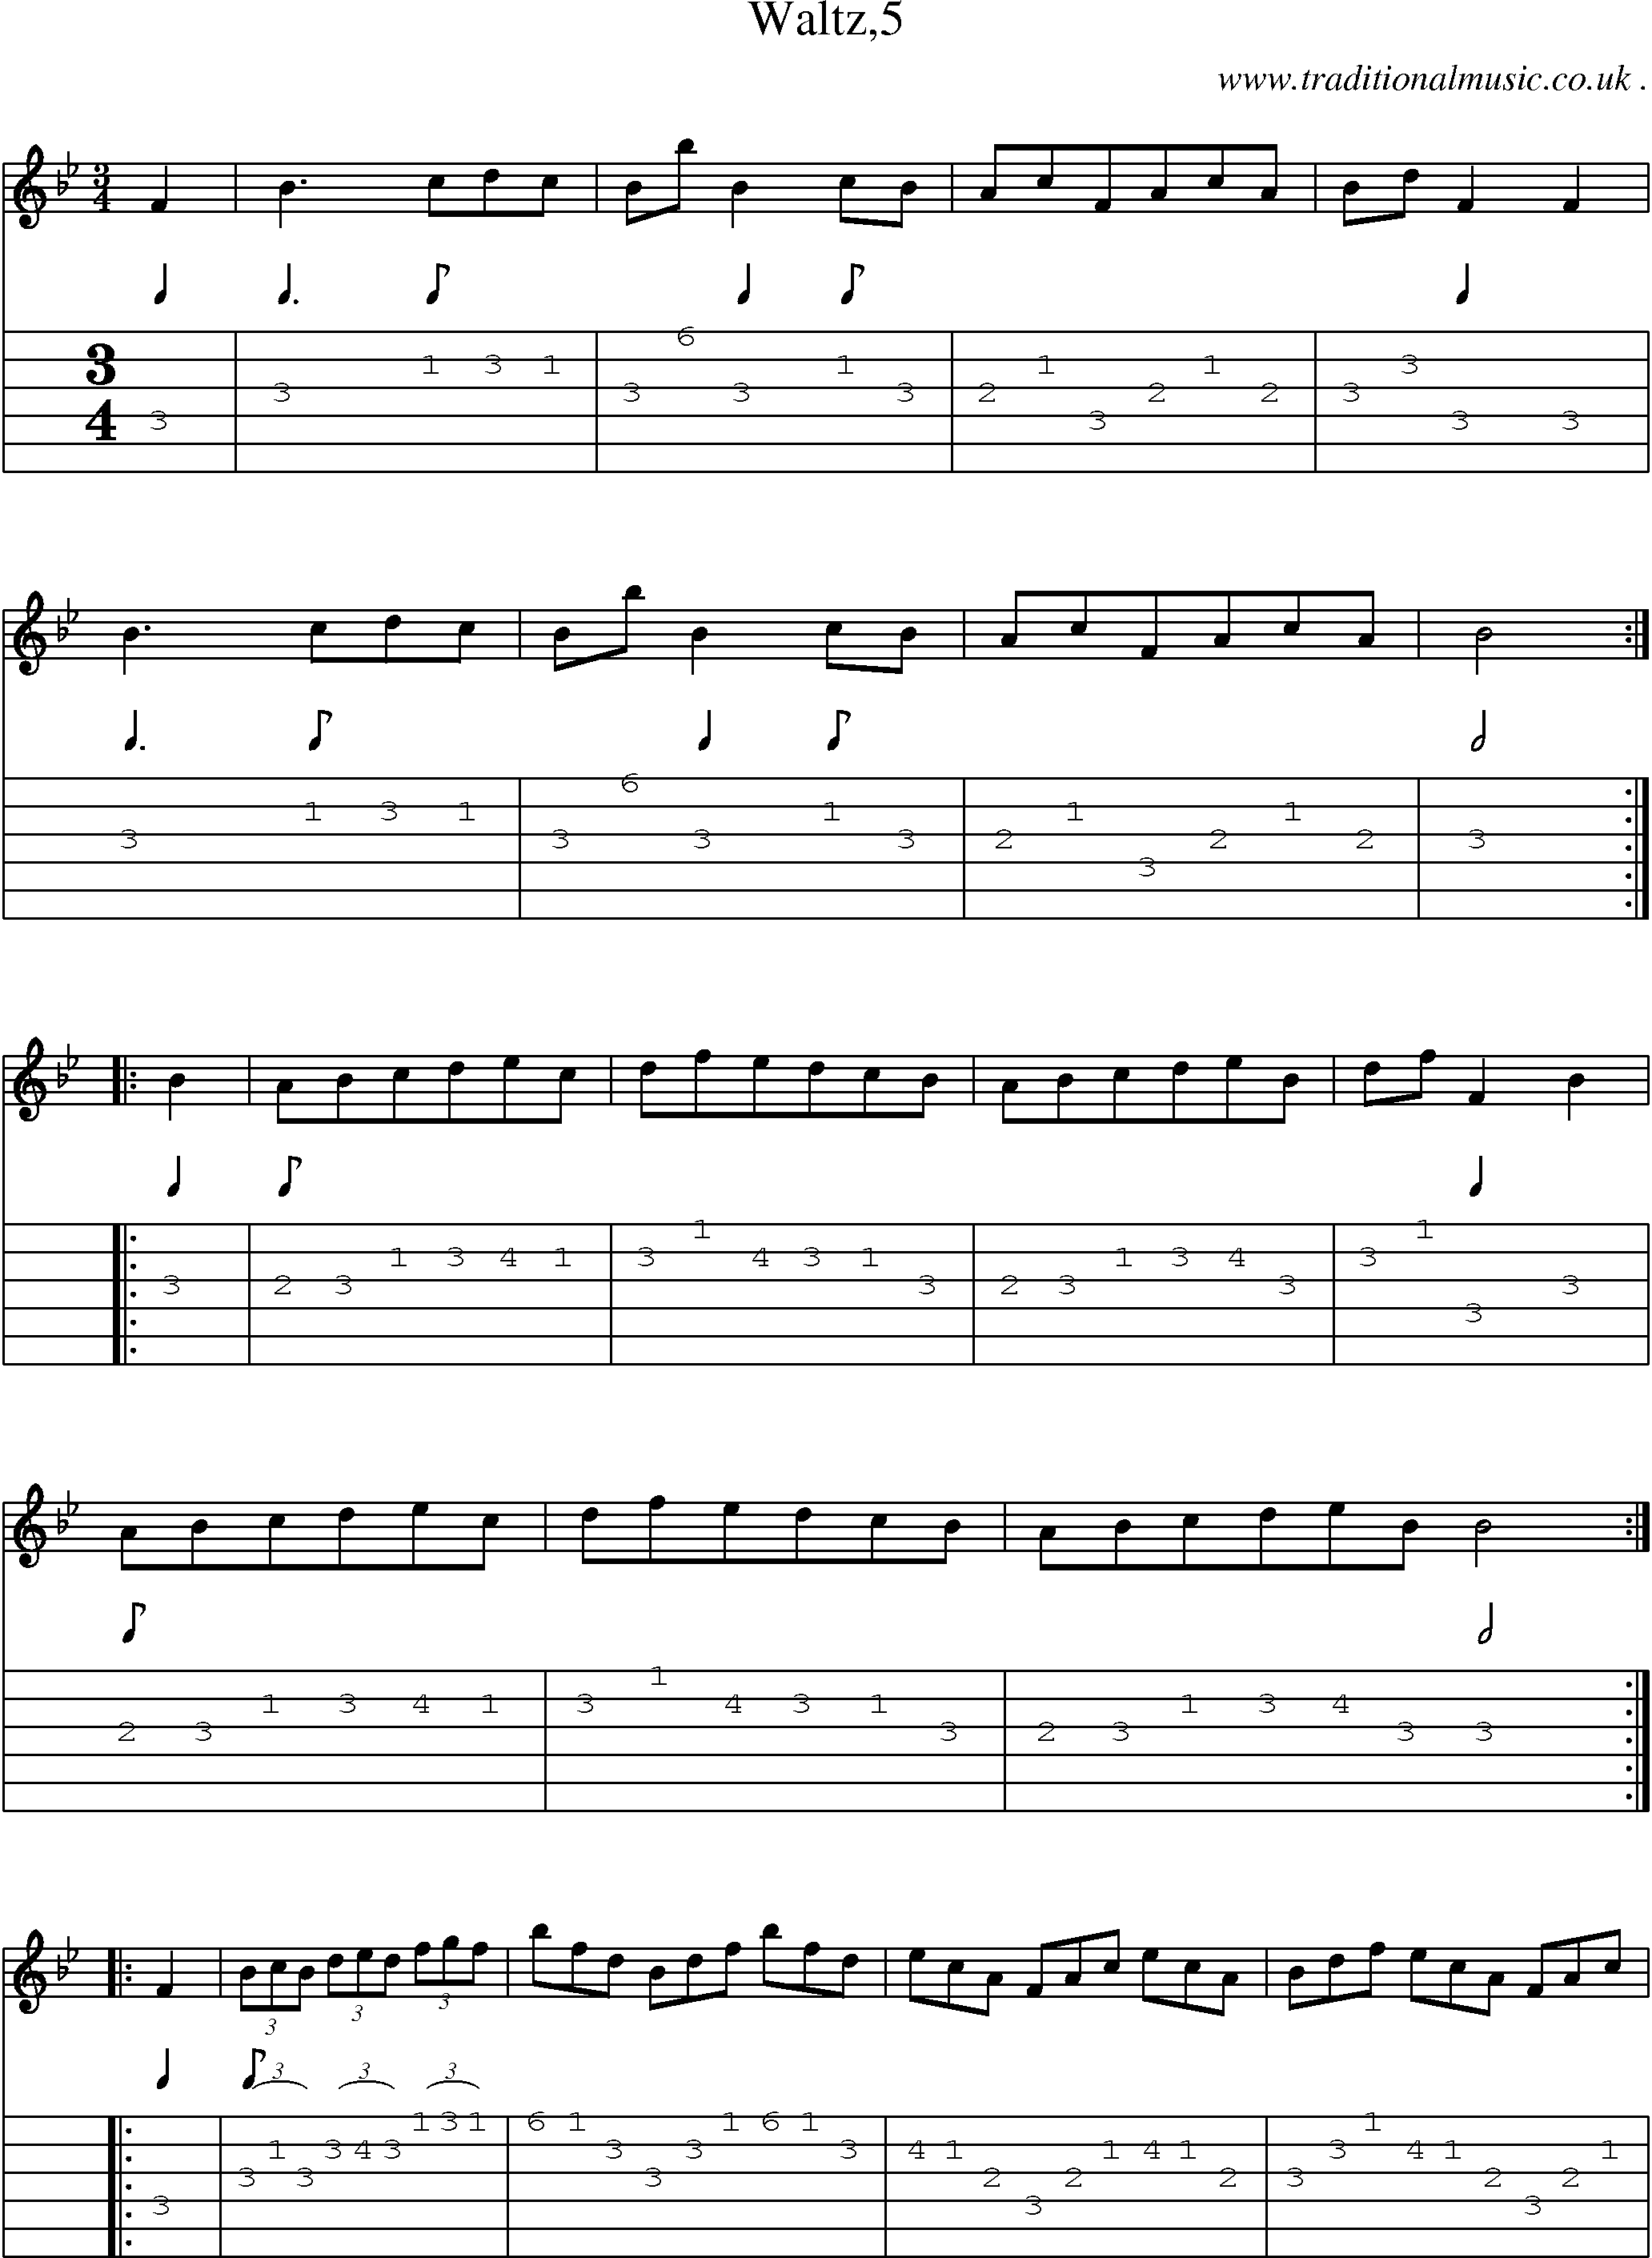 Sheet-Music and Guitar Tabs for Waltz5